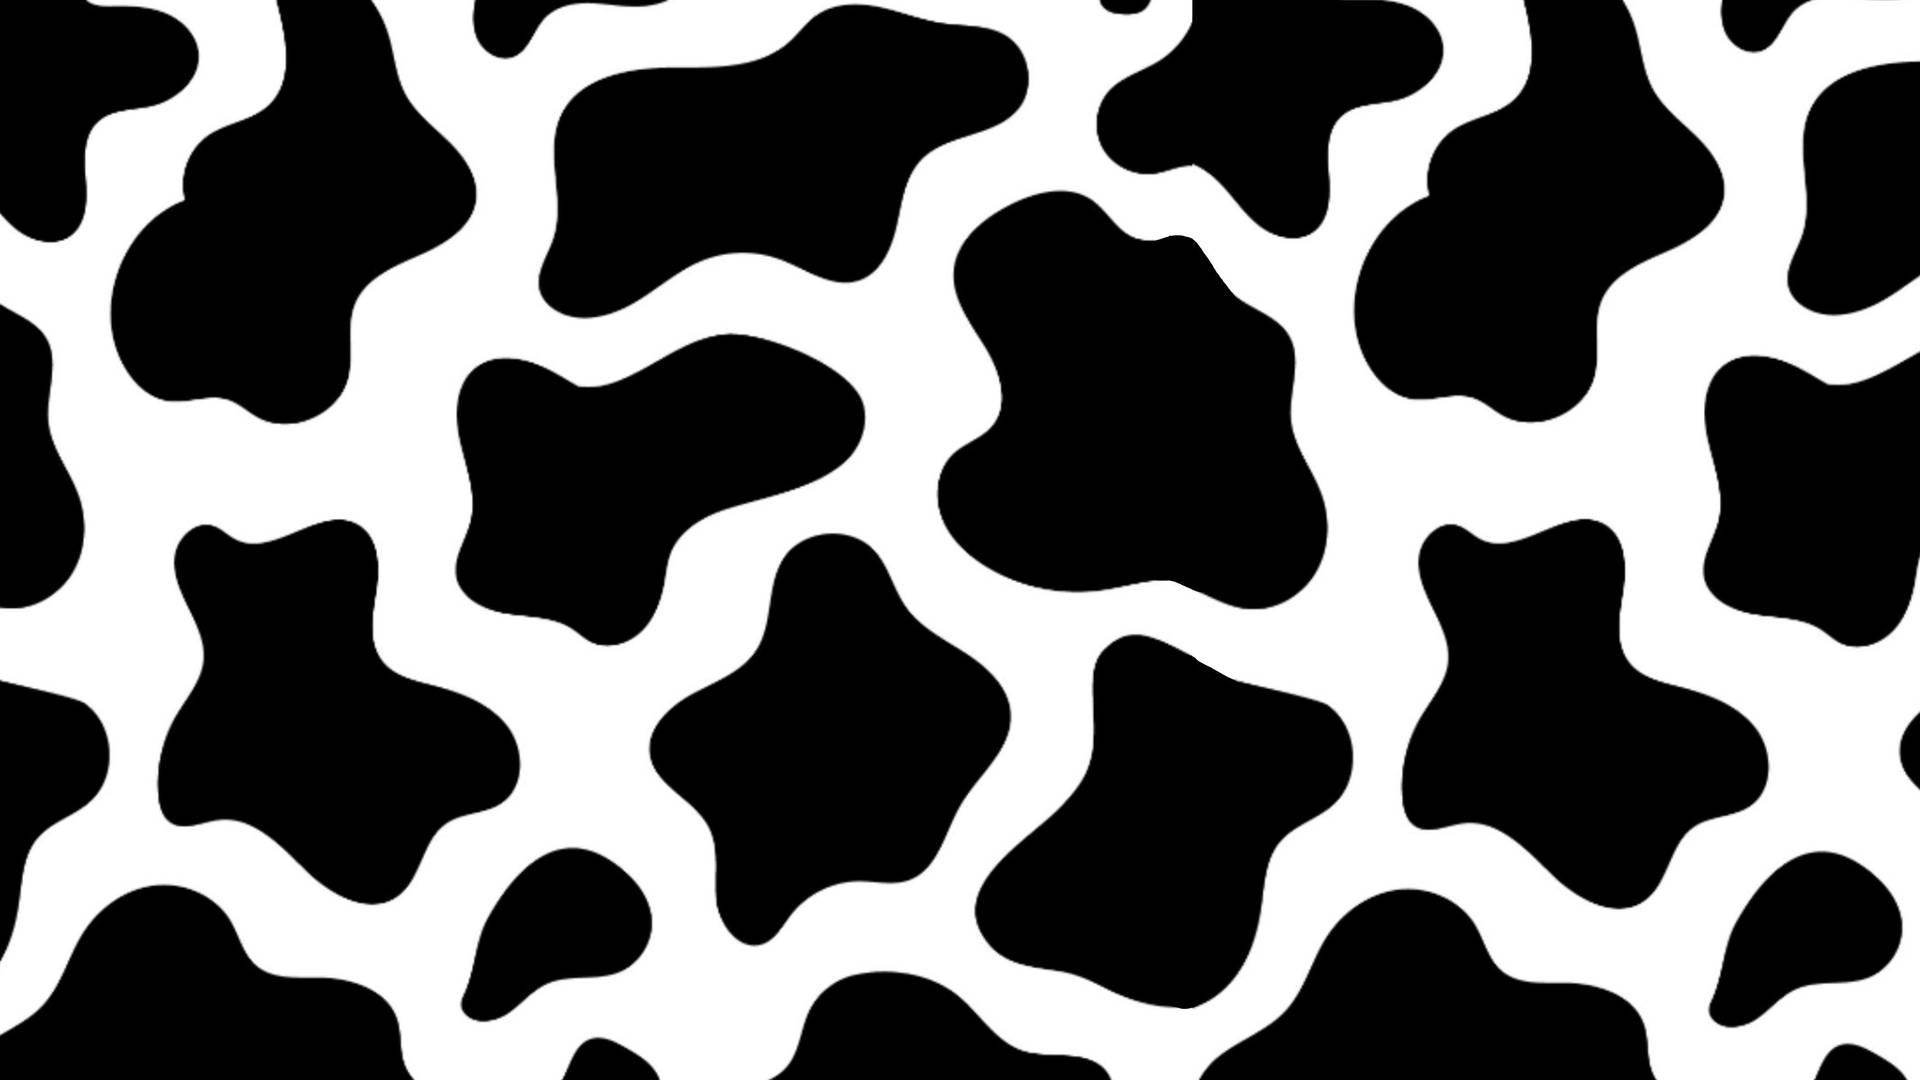 100+] Cow Print Wallpapers